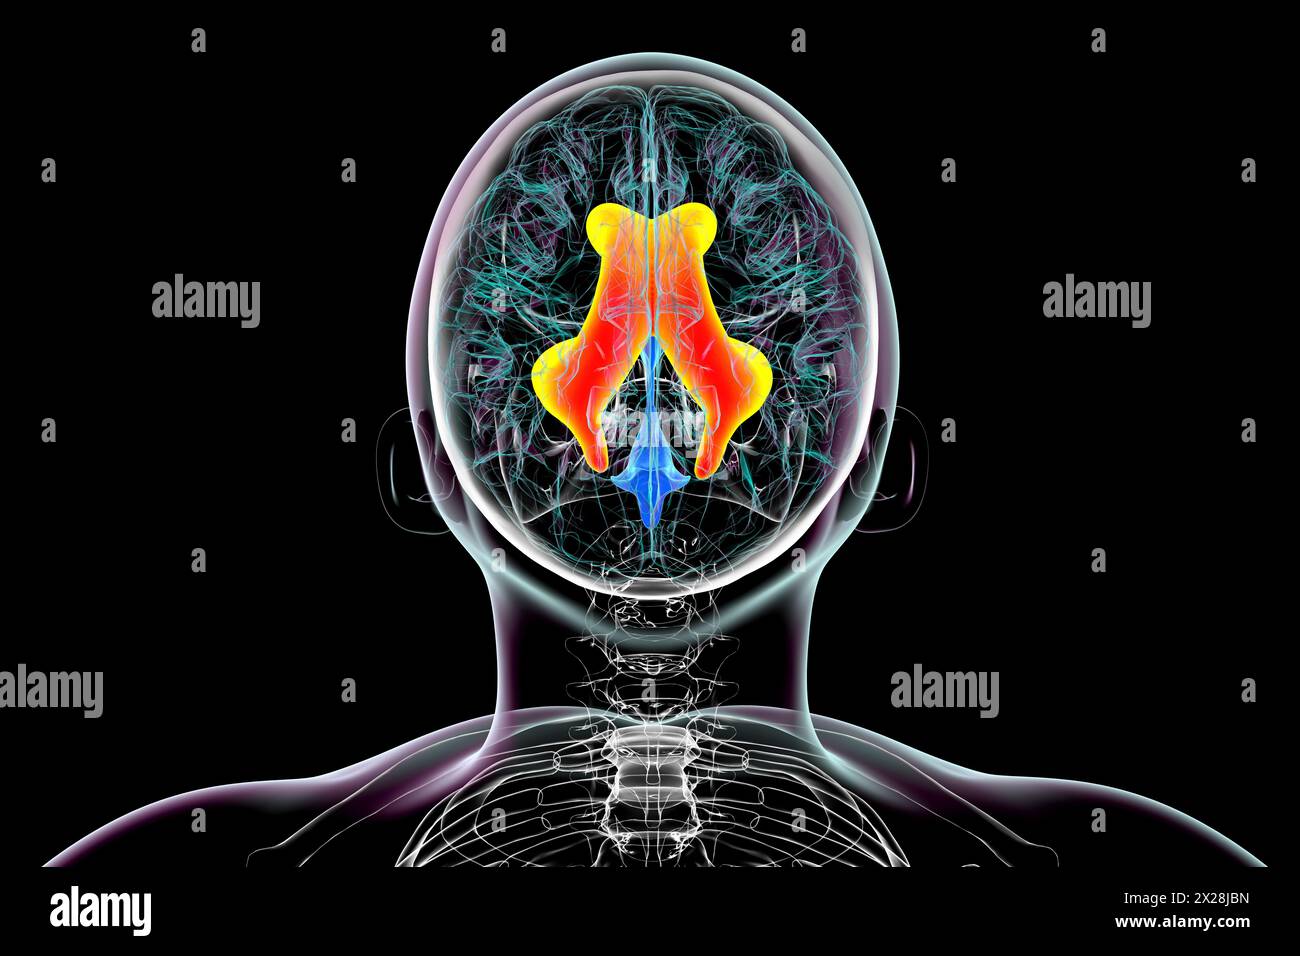 Enlarged lateral ventricles of the brain, illustration Stock Photo